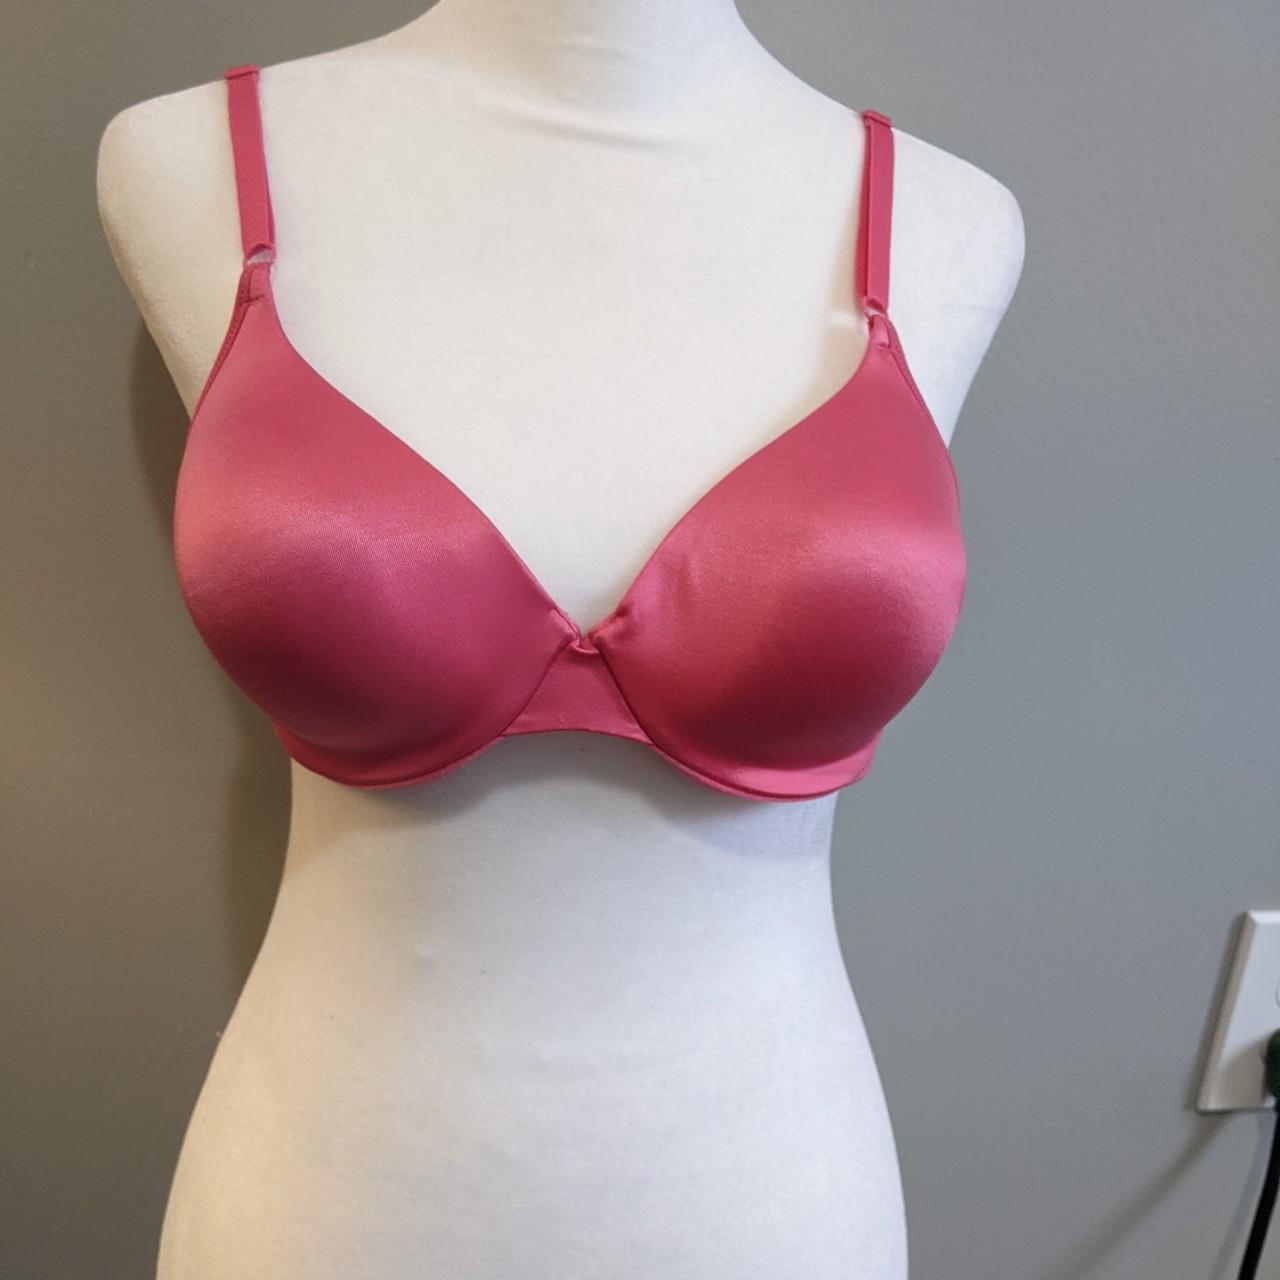 Barely There pink satin bra 36B, can fit a 34 as